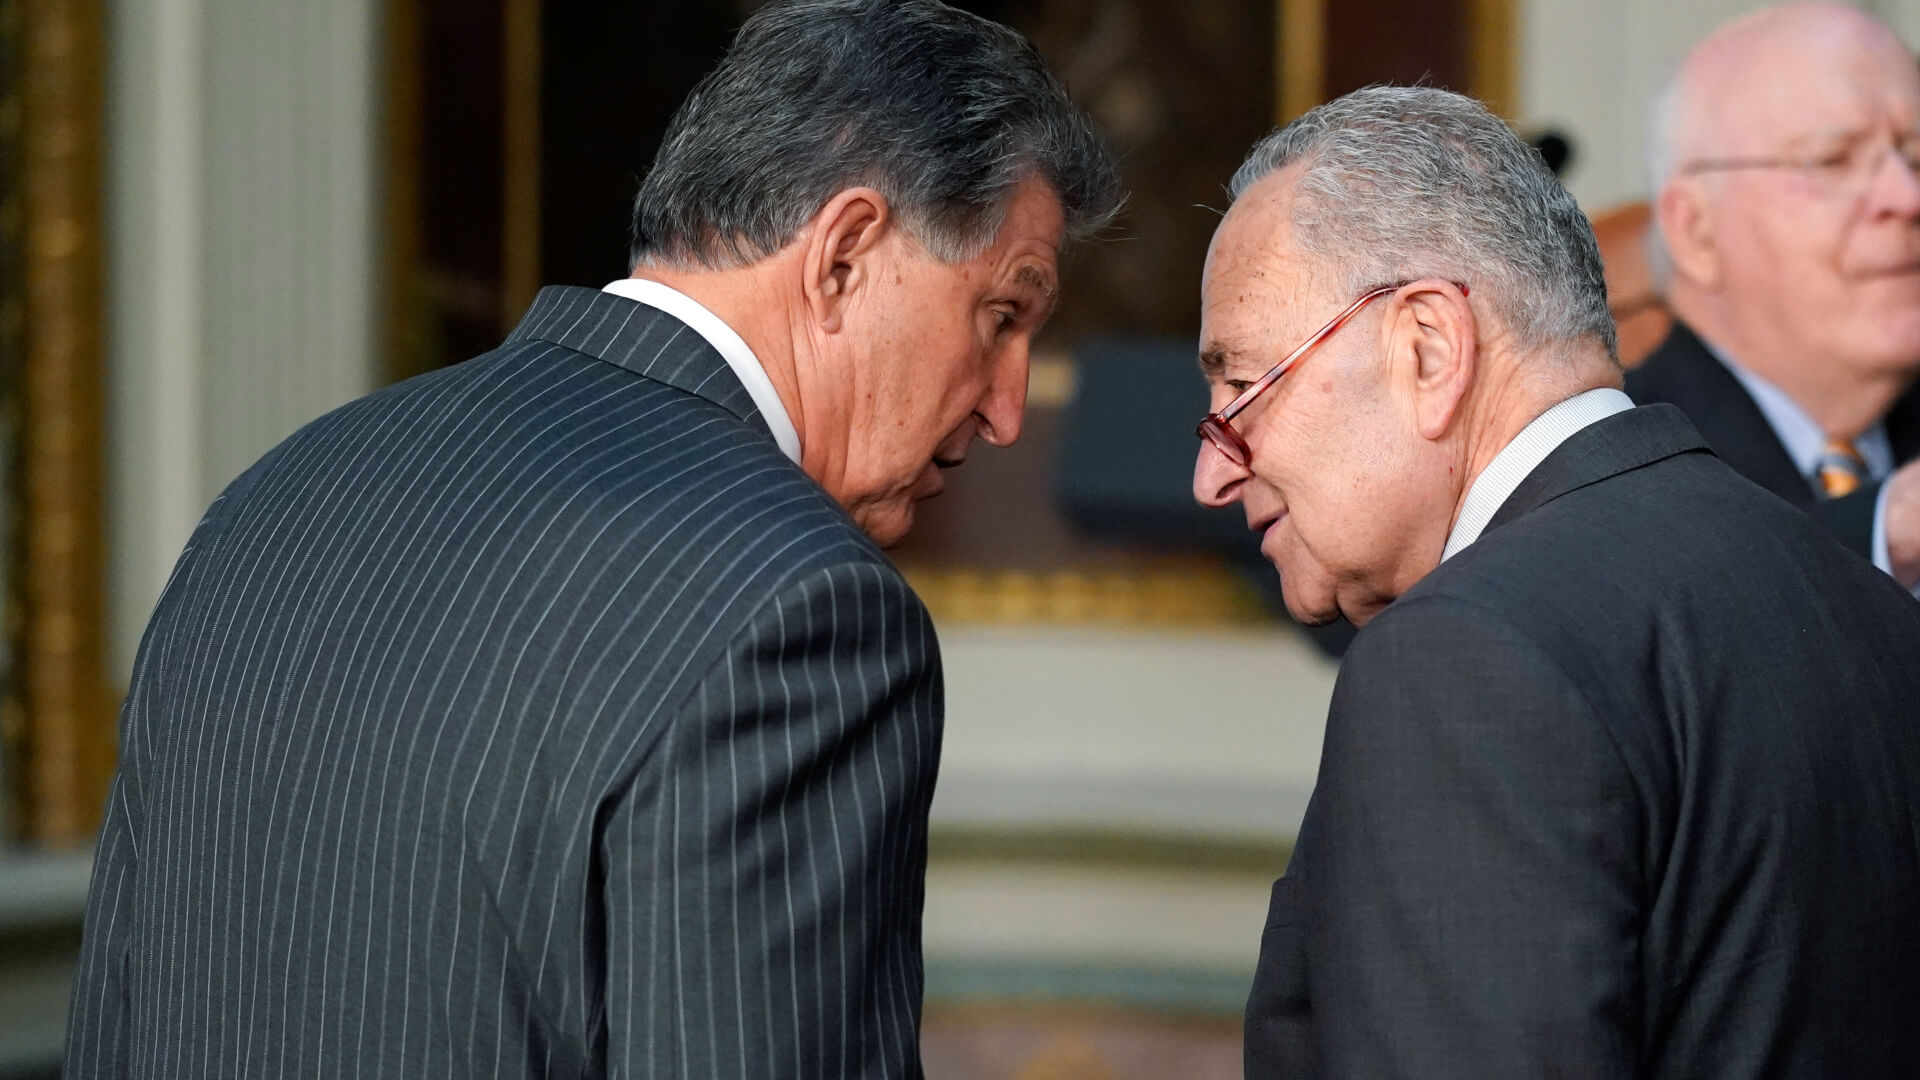 Schumer, Manchin Agree to Tax Ultra-Wealthy to Fund ‘Greatest-Ever’ Pro-Climate Bill